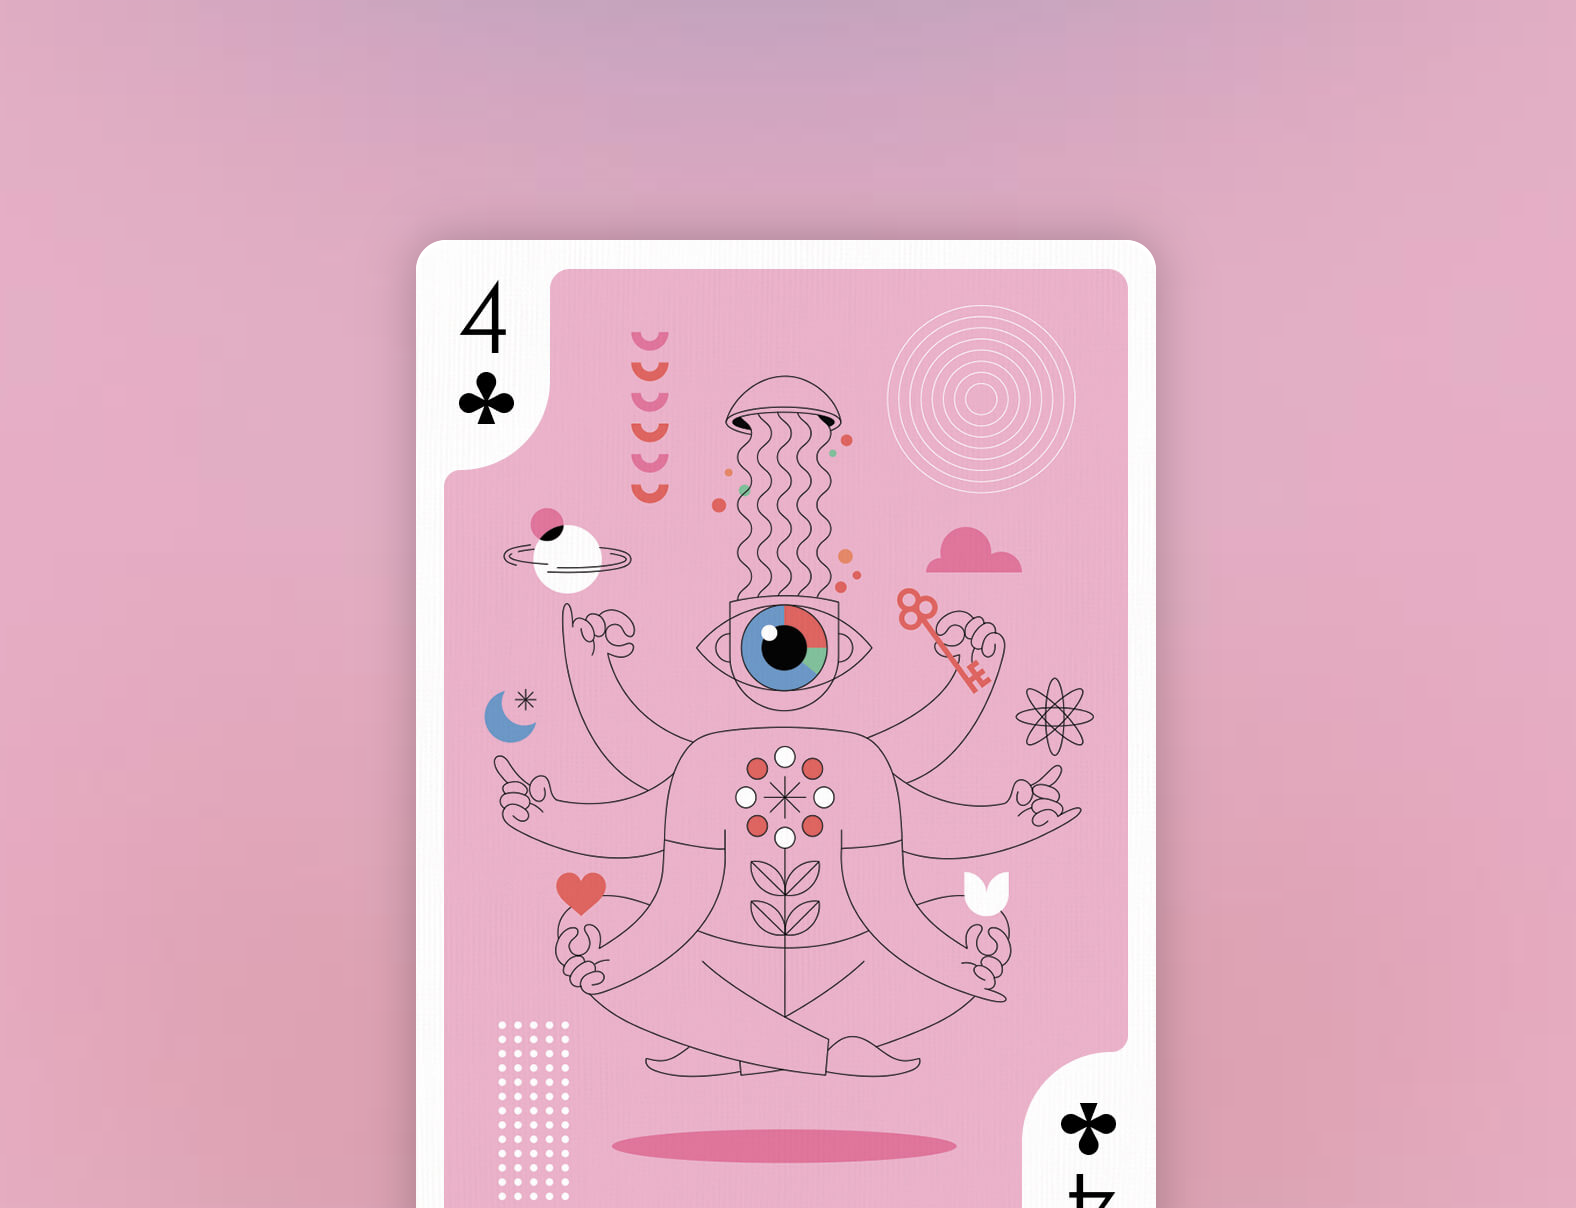 Artistic Playing Cards Inspired by The Future